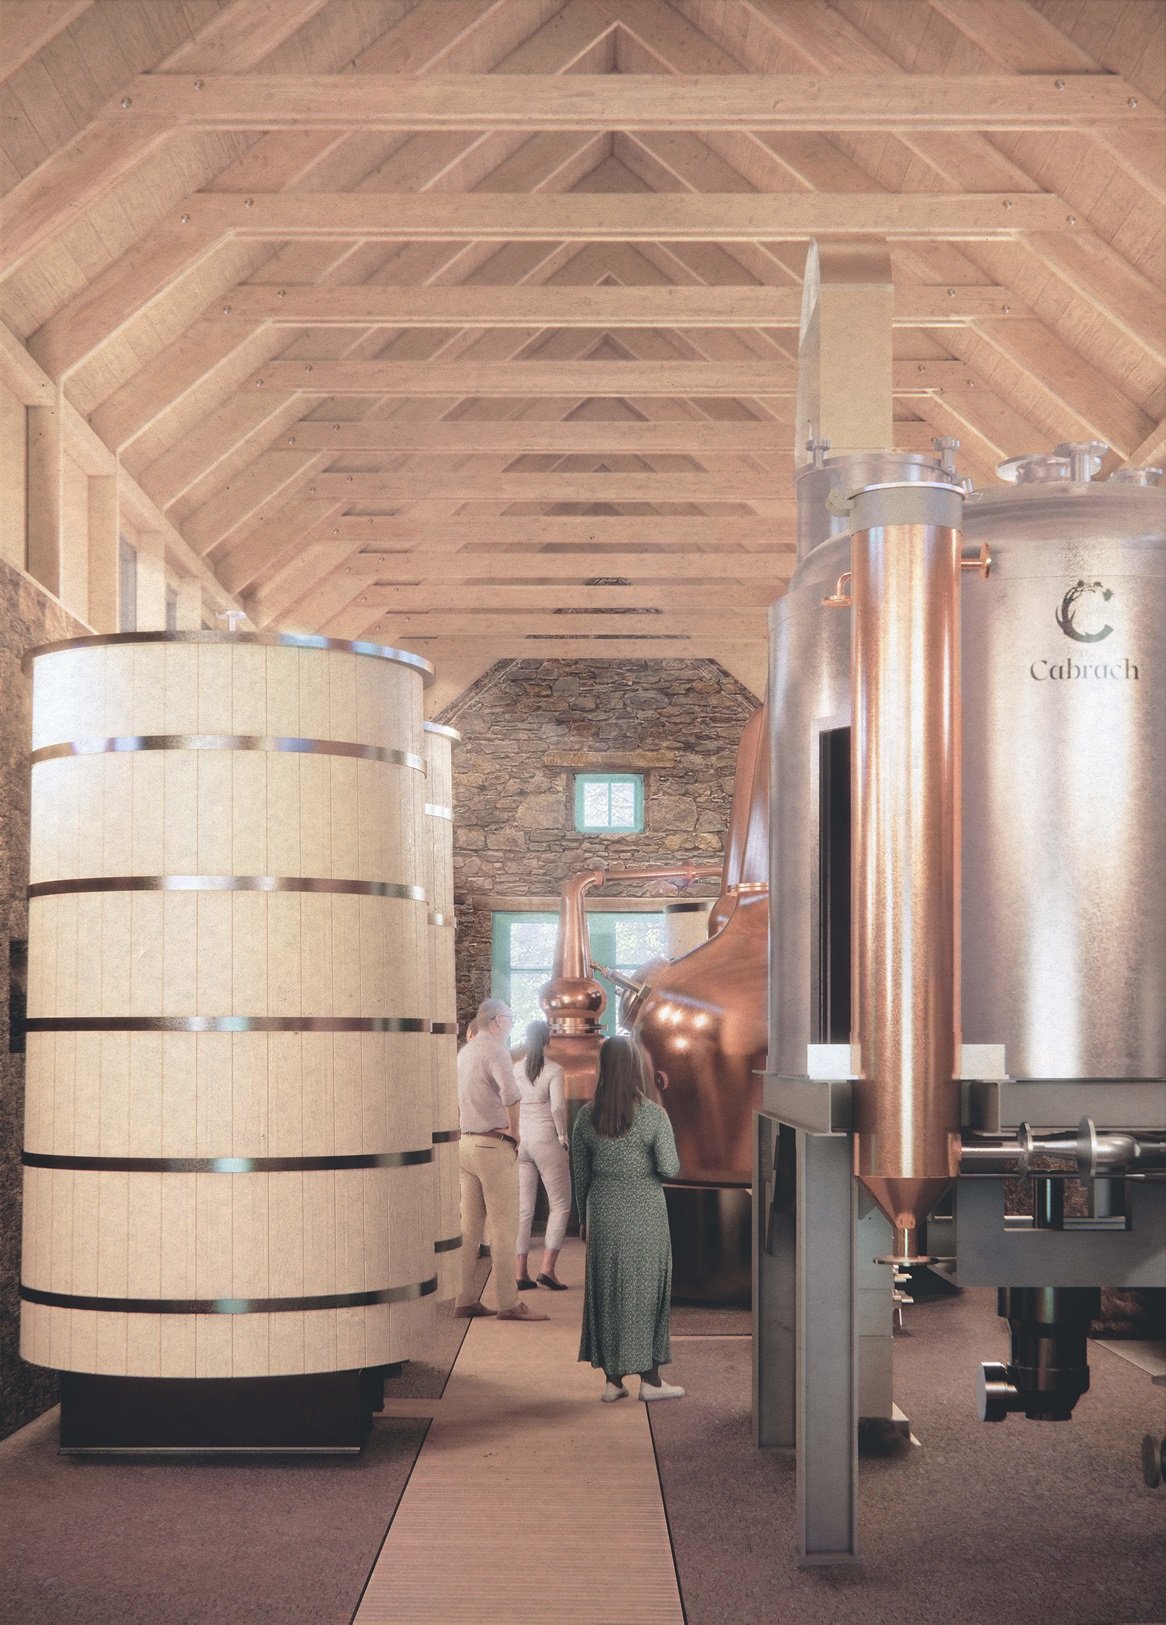 The Cabrach Distillery prepares for launch in heartland of malt whisky